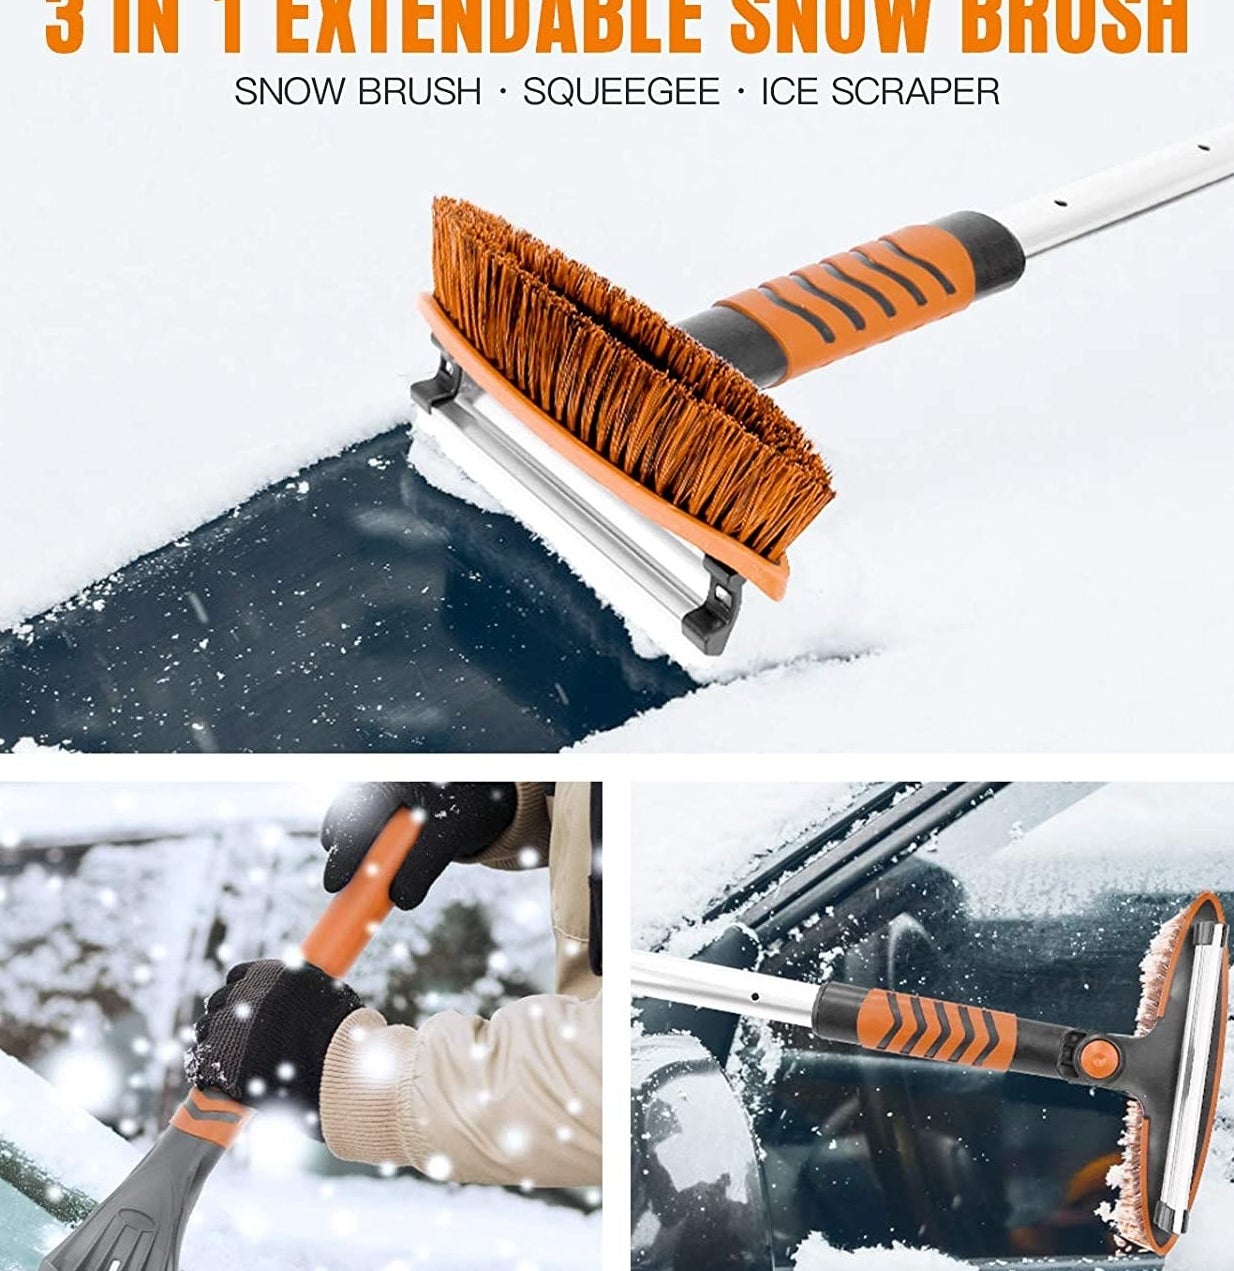 The snow brush being use in multiple ways on car windows